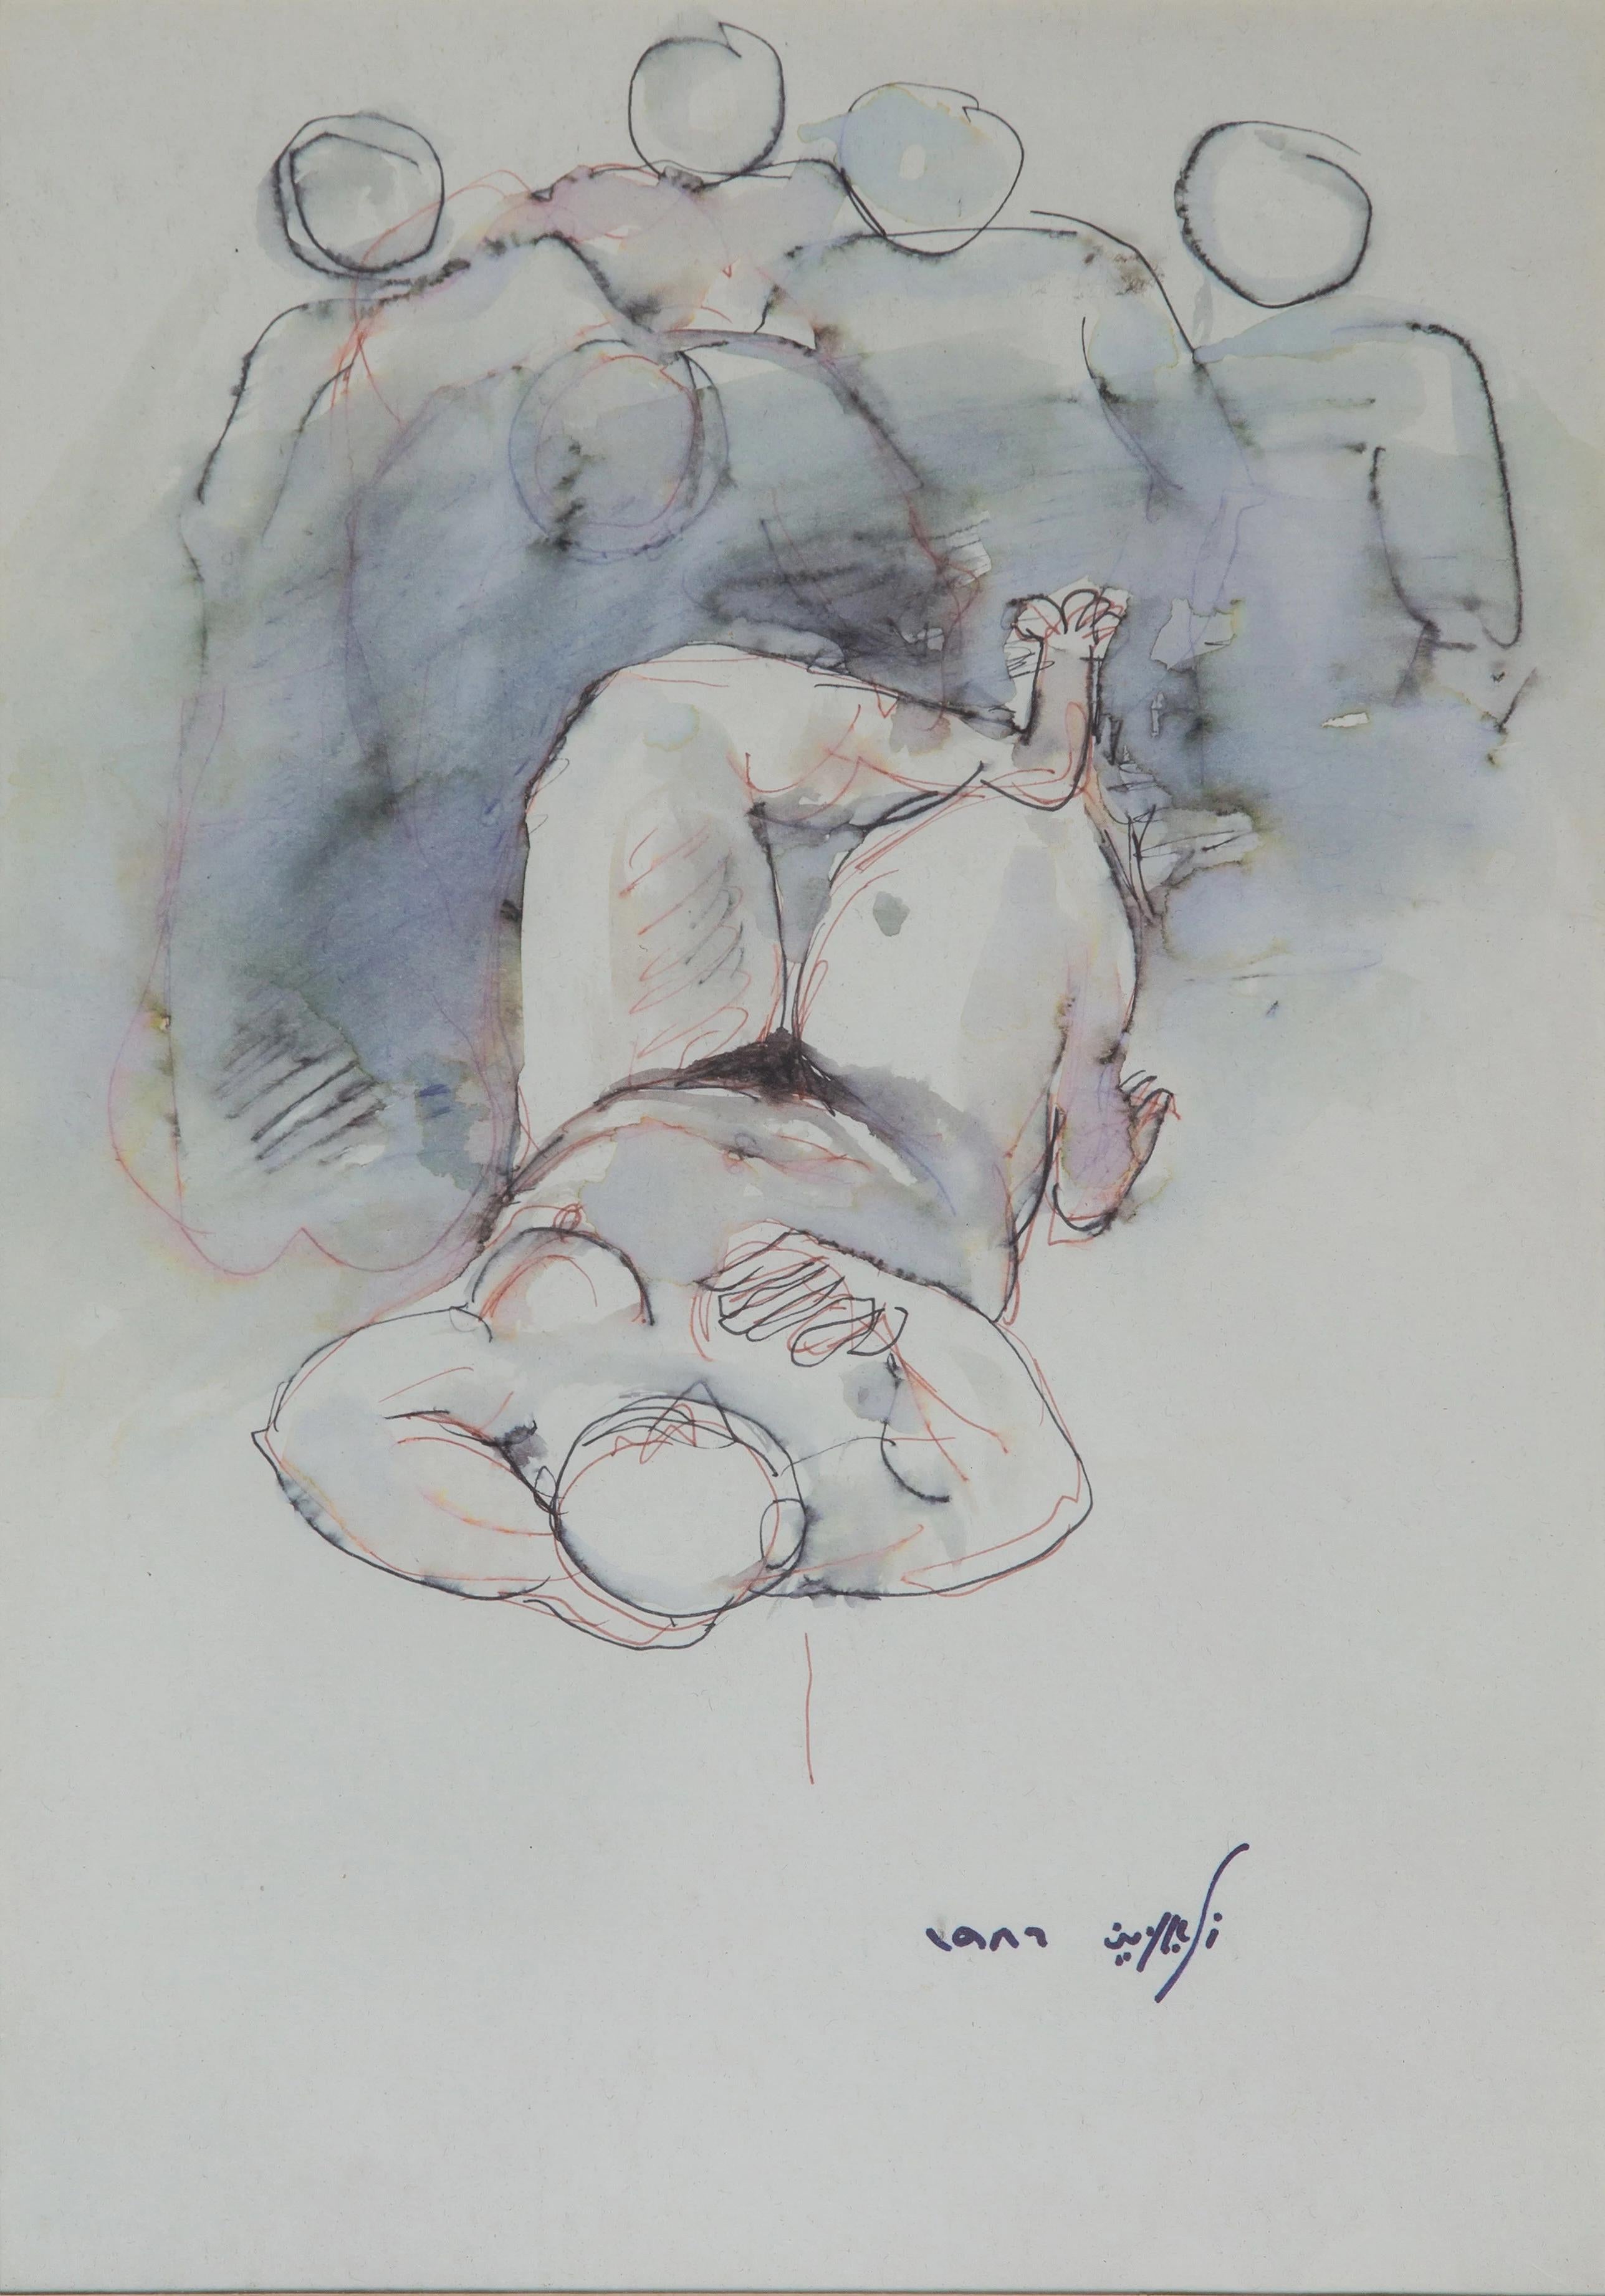 "Bathers II" Abstract Watercolor Painting 13" x 9" inch (1986) by Zaccaria Zeini

Medium: watercolor on paper
Signed and dated 

Zaccaria El Zeini (1932 - 1993) was raised in the popular district of Sayyida Zienab in Old Cairo and graduated from the